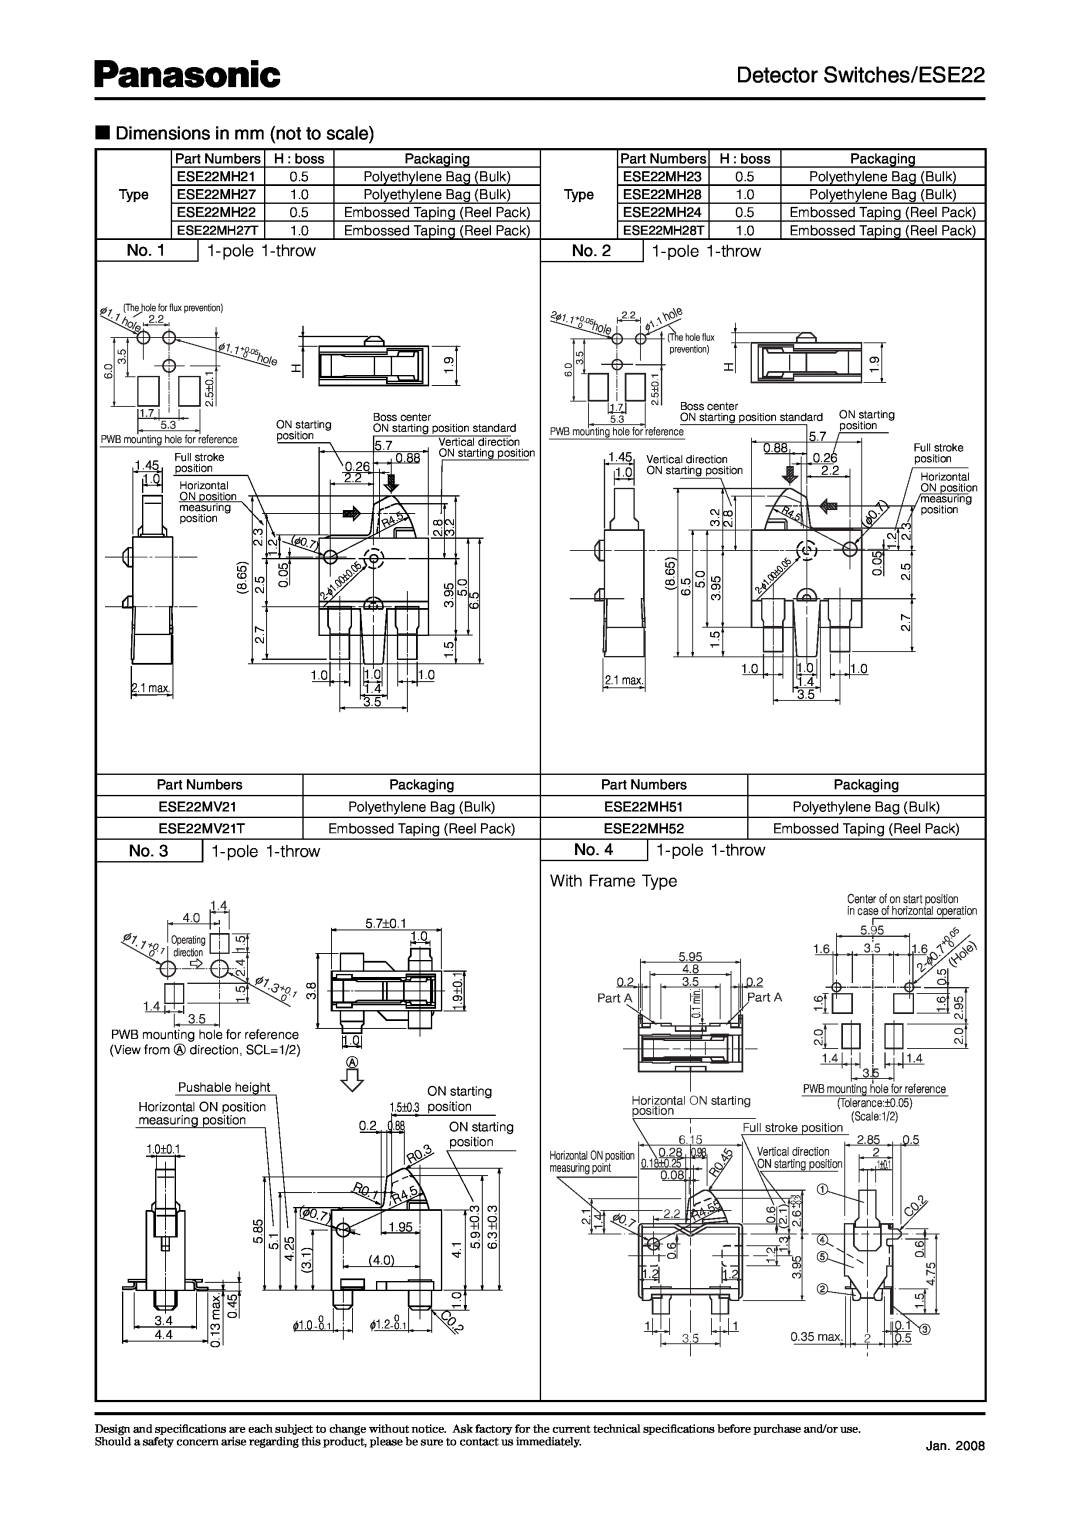 Panasonic specifications Detector Switches/ESE22, Dimensions in mm not to scale, hole 